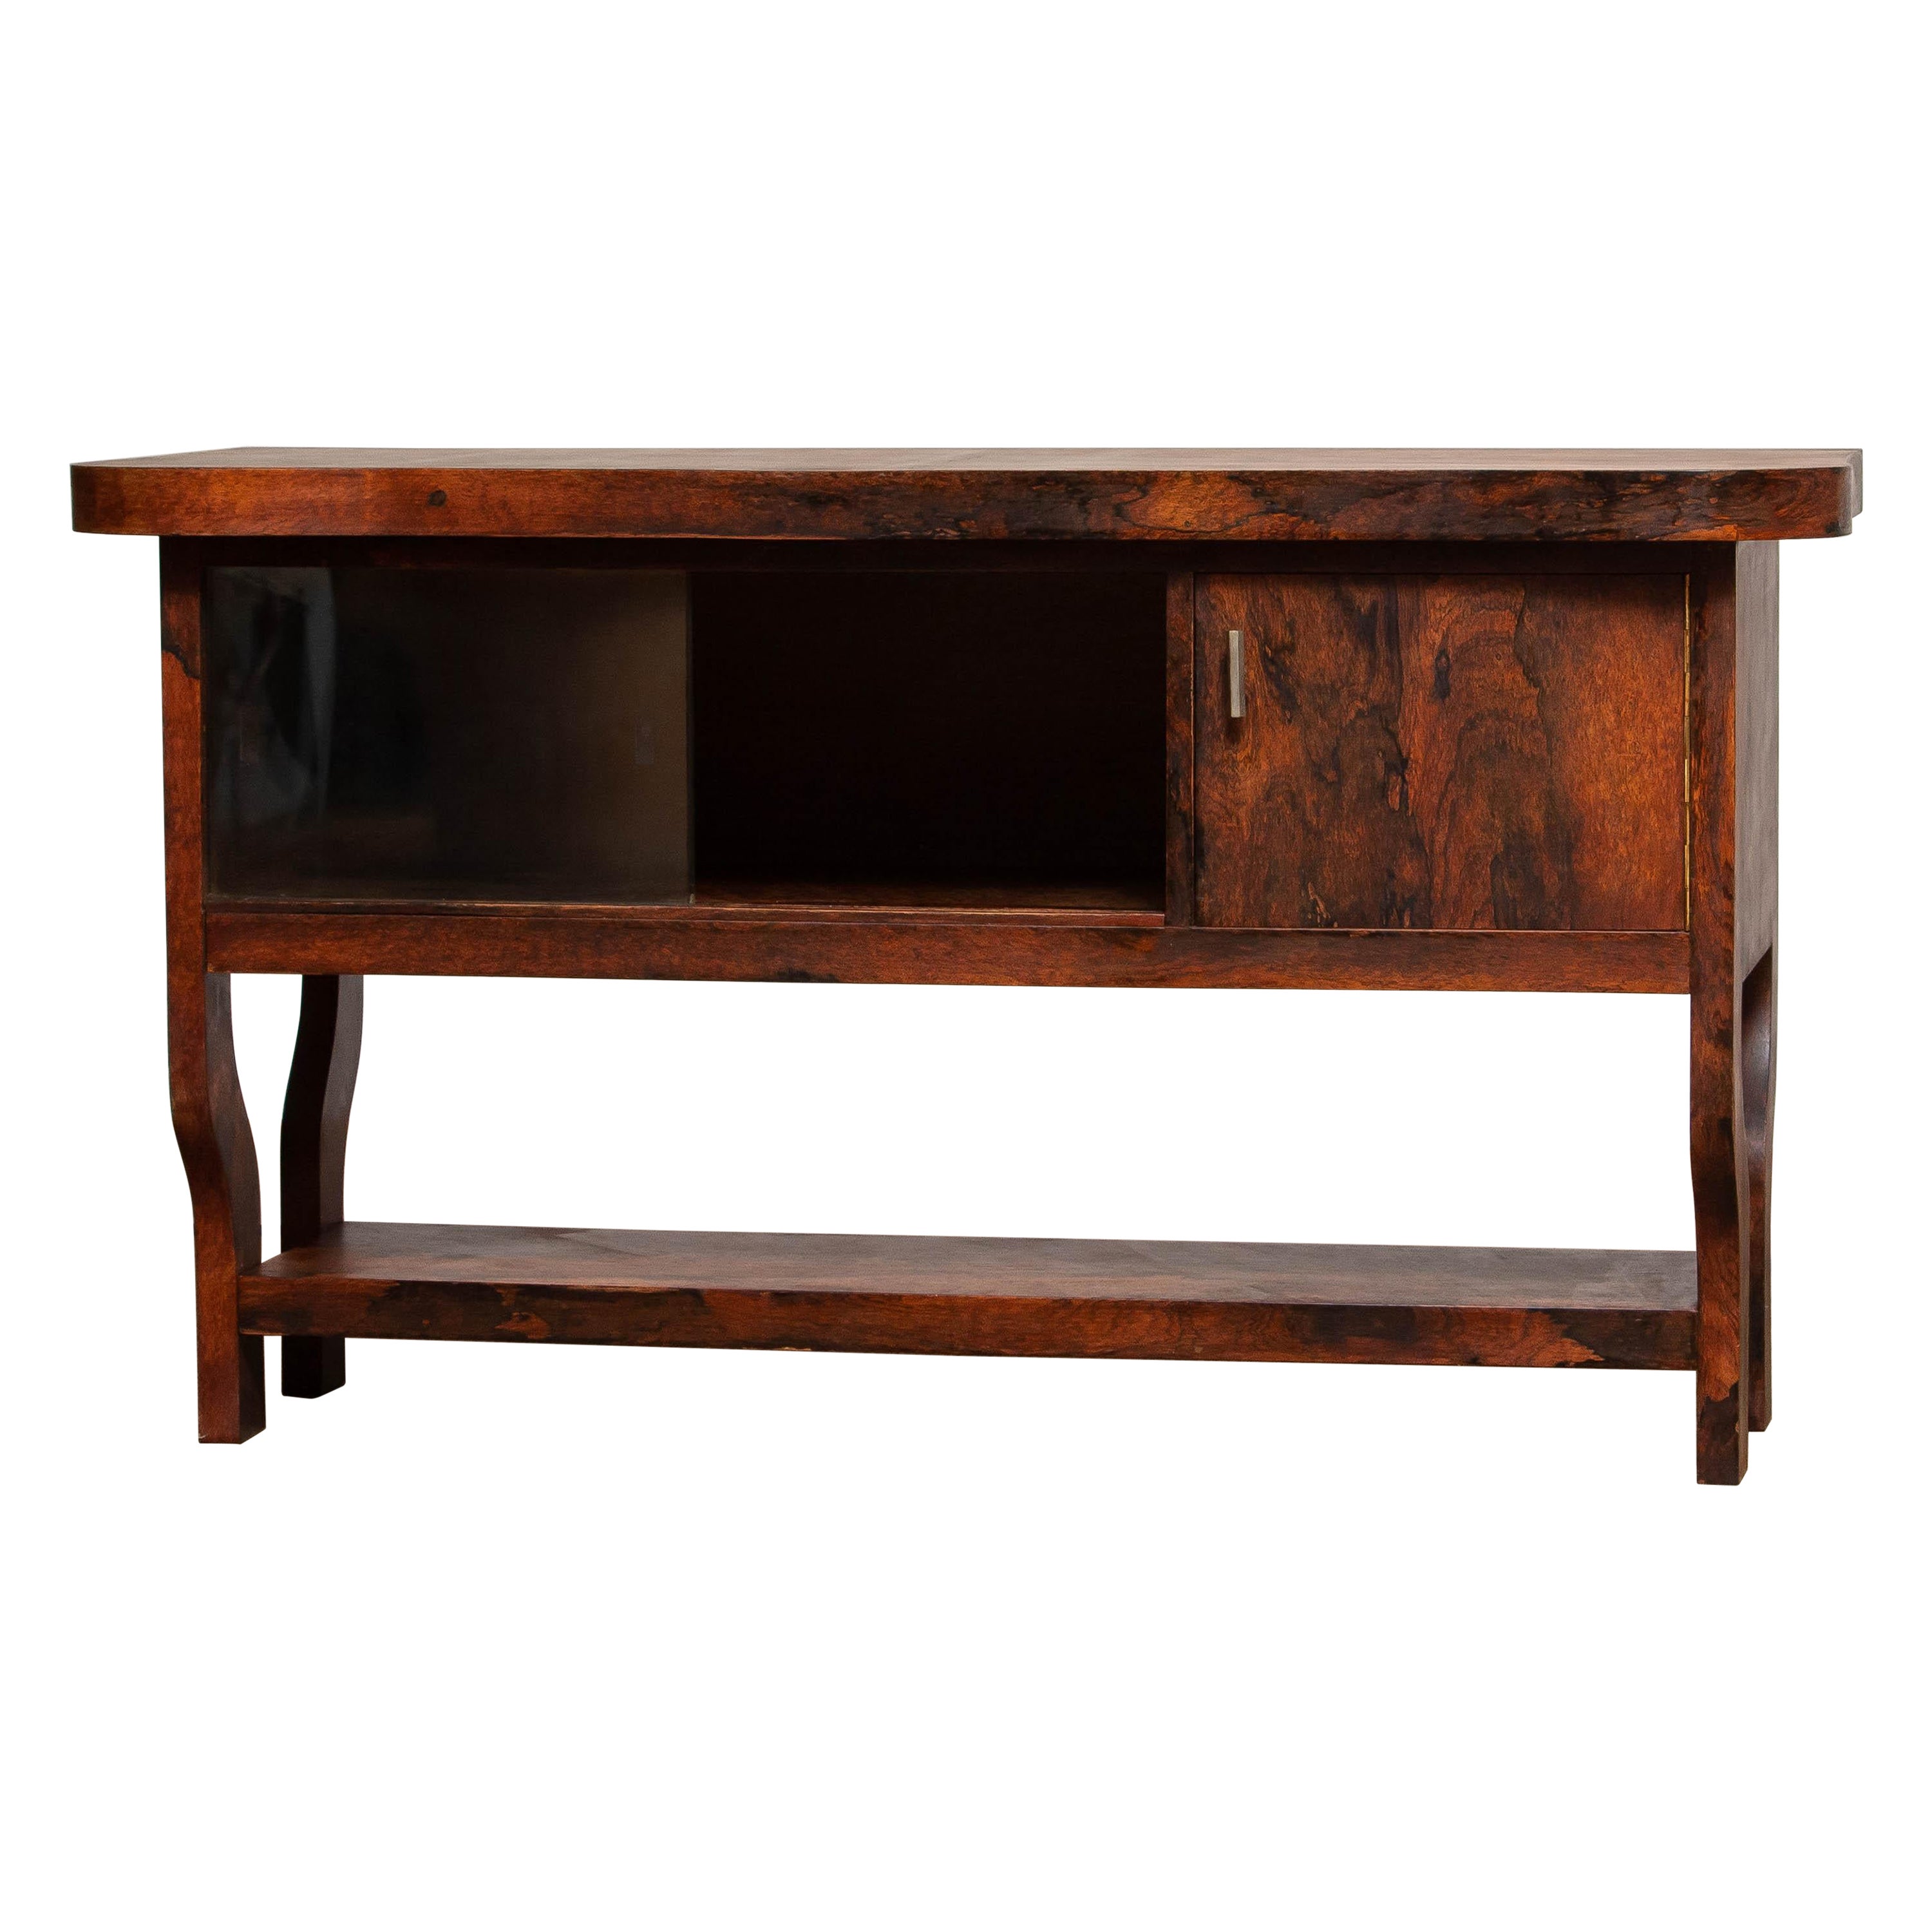 1920s Dutch Sideboard with Glass Sliding and Wooden Folding Doors in Burl Walnut For Sale